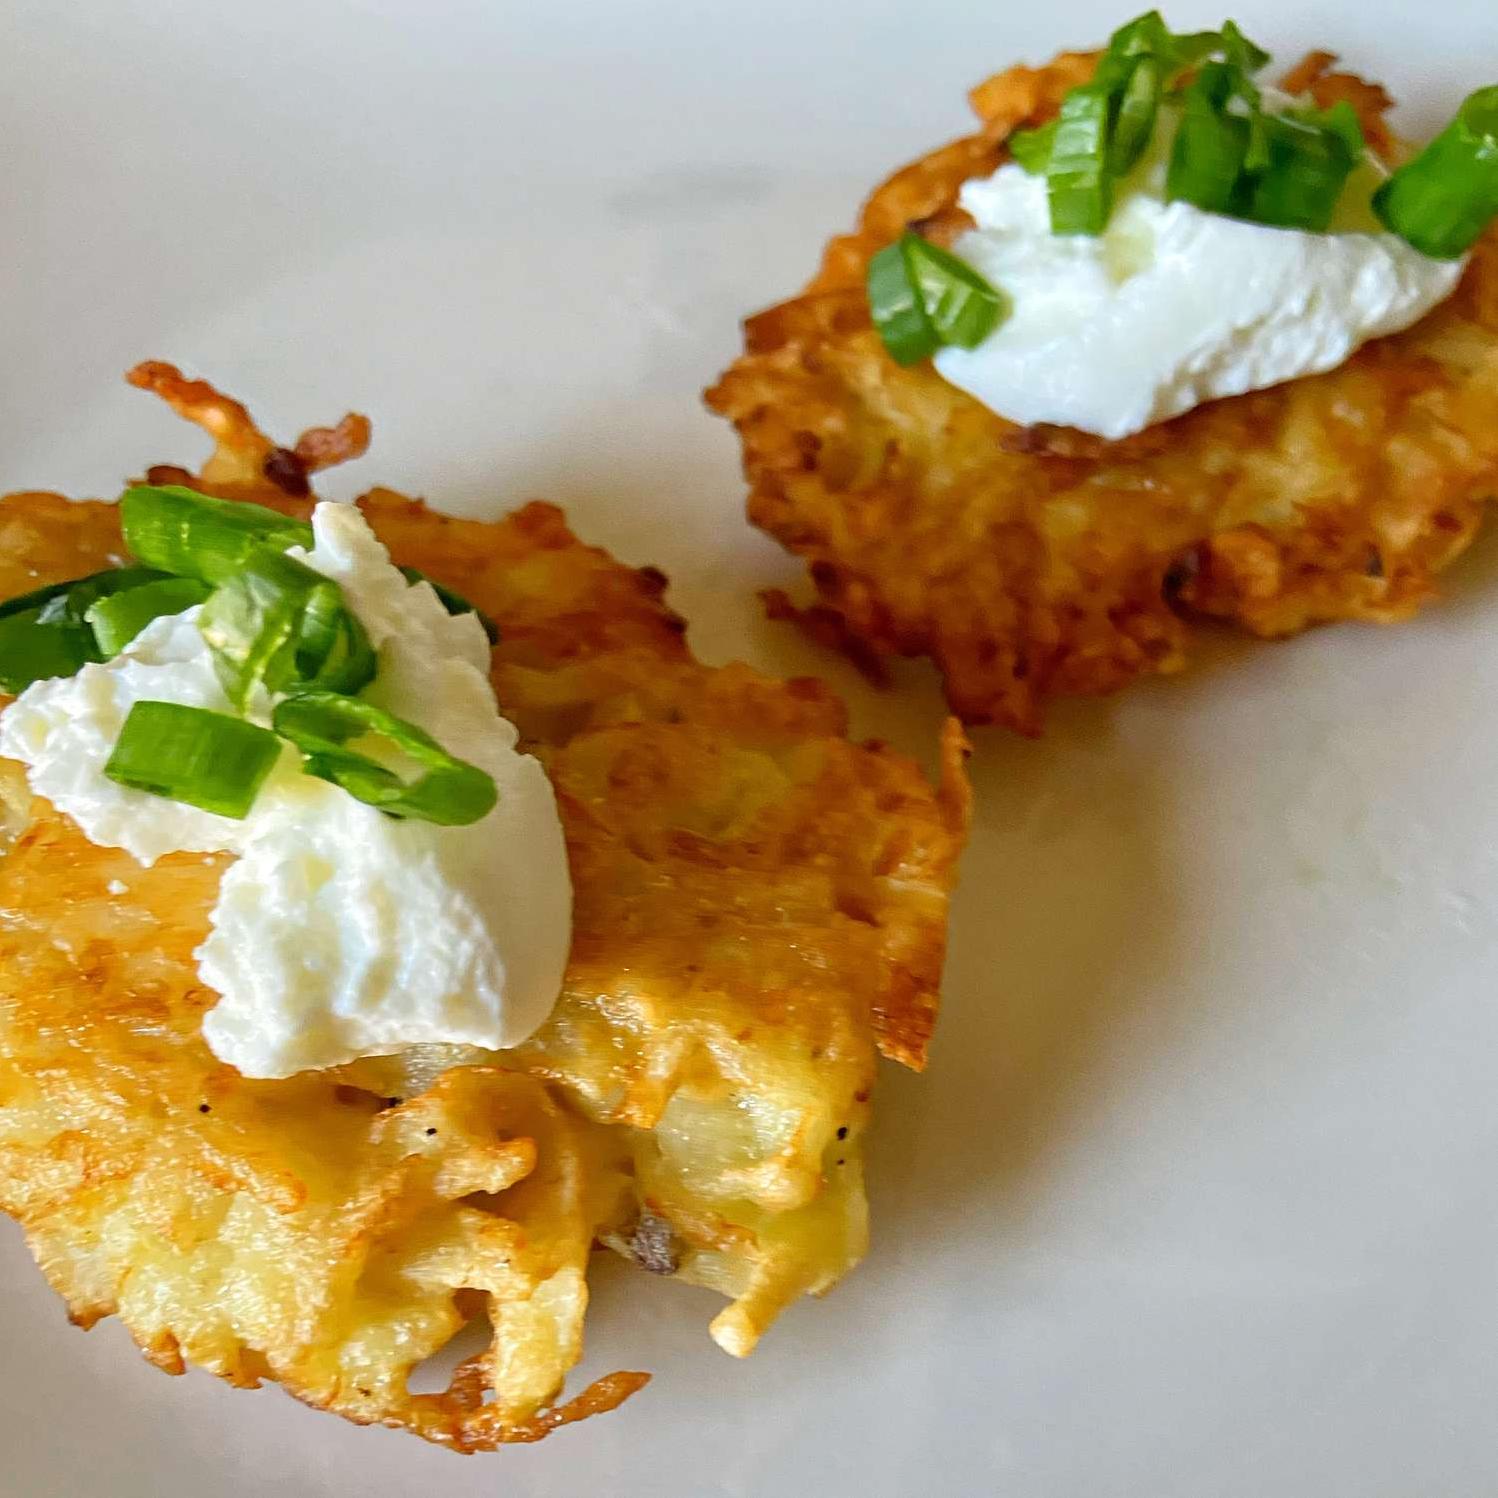  These Potato Latkes are bound to become your favorite snack for any occasion